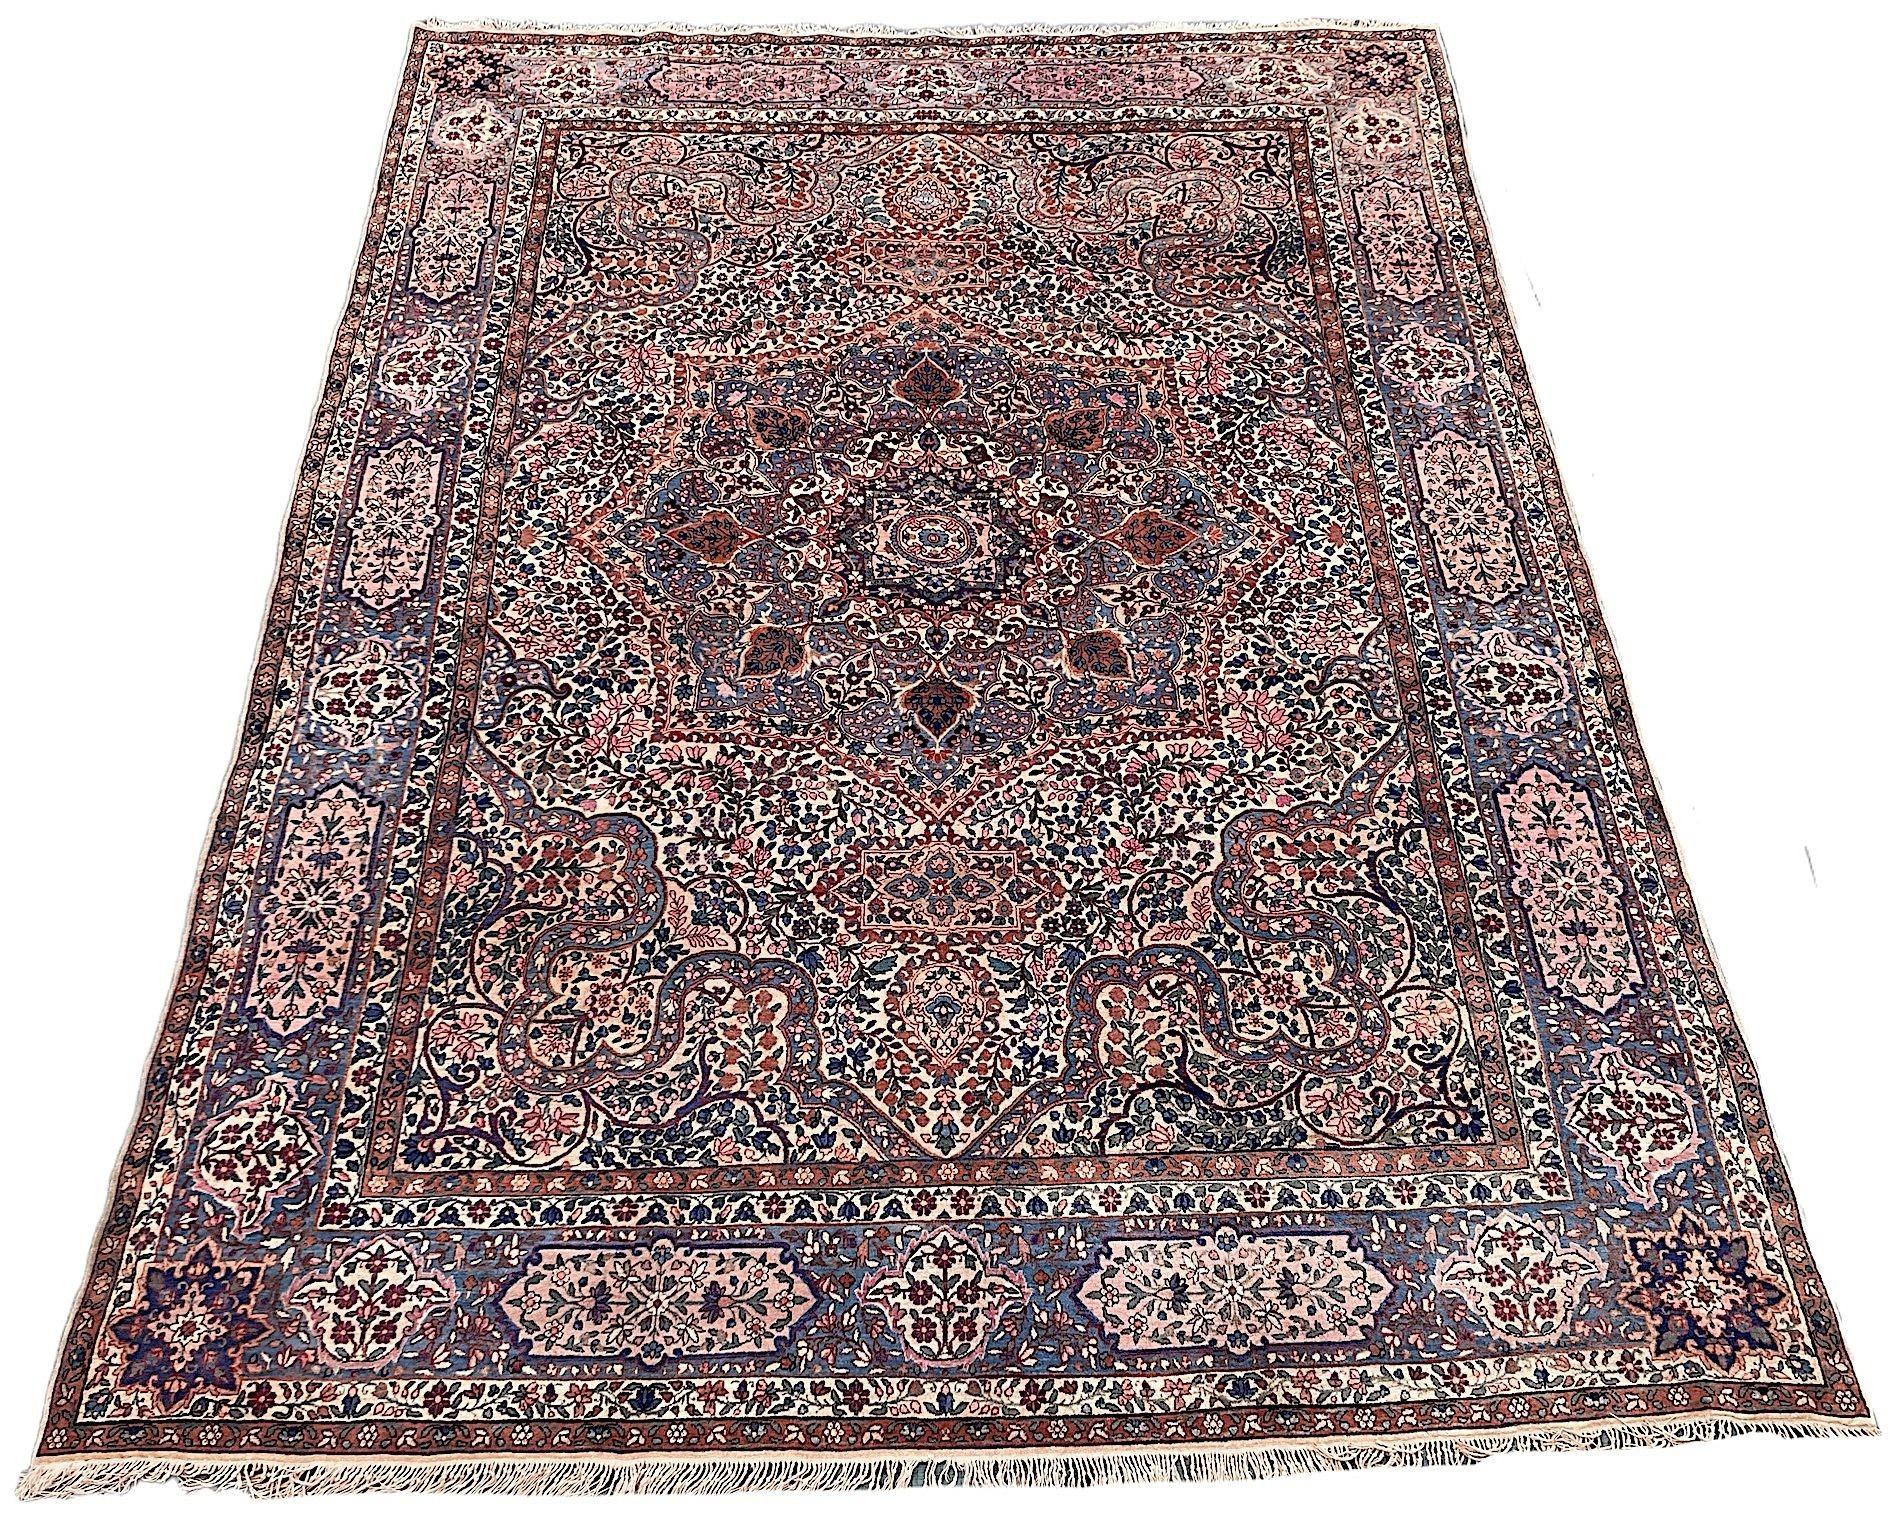 A stunning antique Kirman carpet, hand woven circa 1910. The design features a large indigo medallion on an ivory field of scrolling vines and flowers surrounded by an indigo border. Finely woven with soft, velvety wool and lovely secondary colours